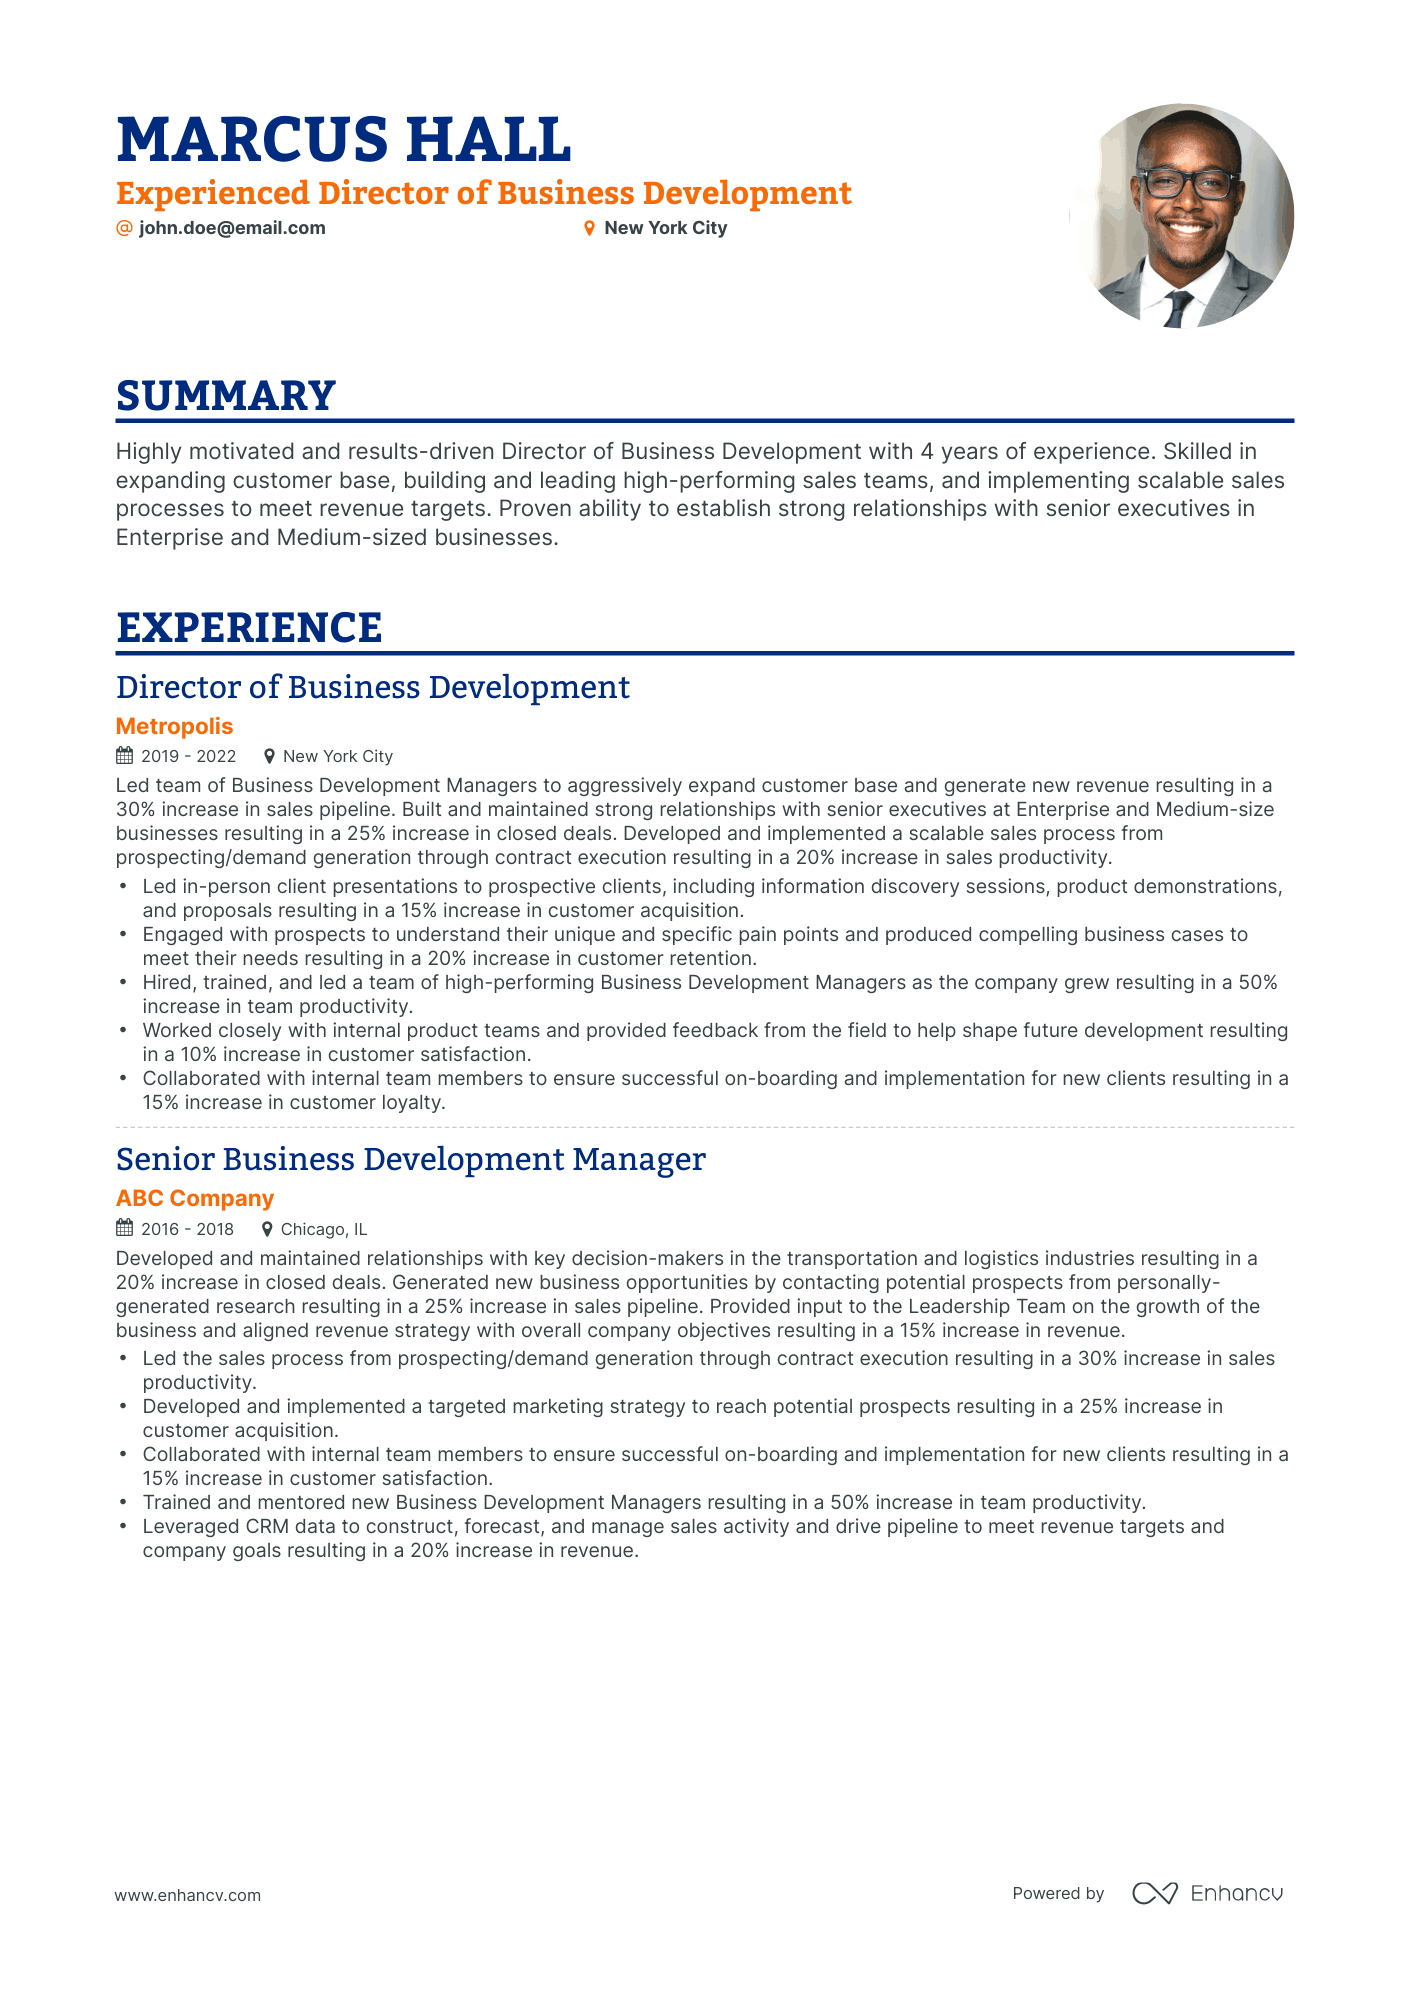 Classic Director of Business Development Resume Template